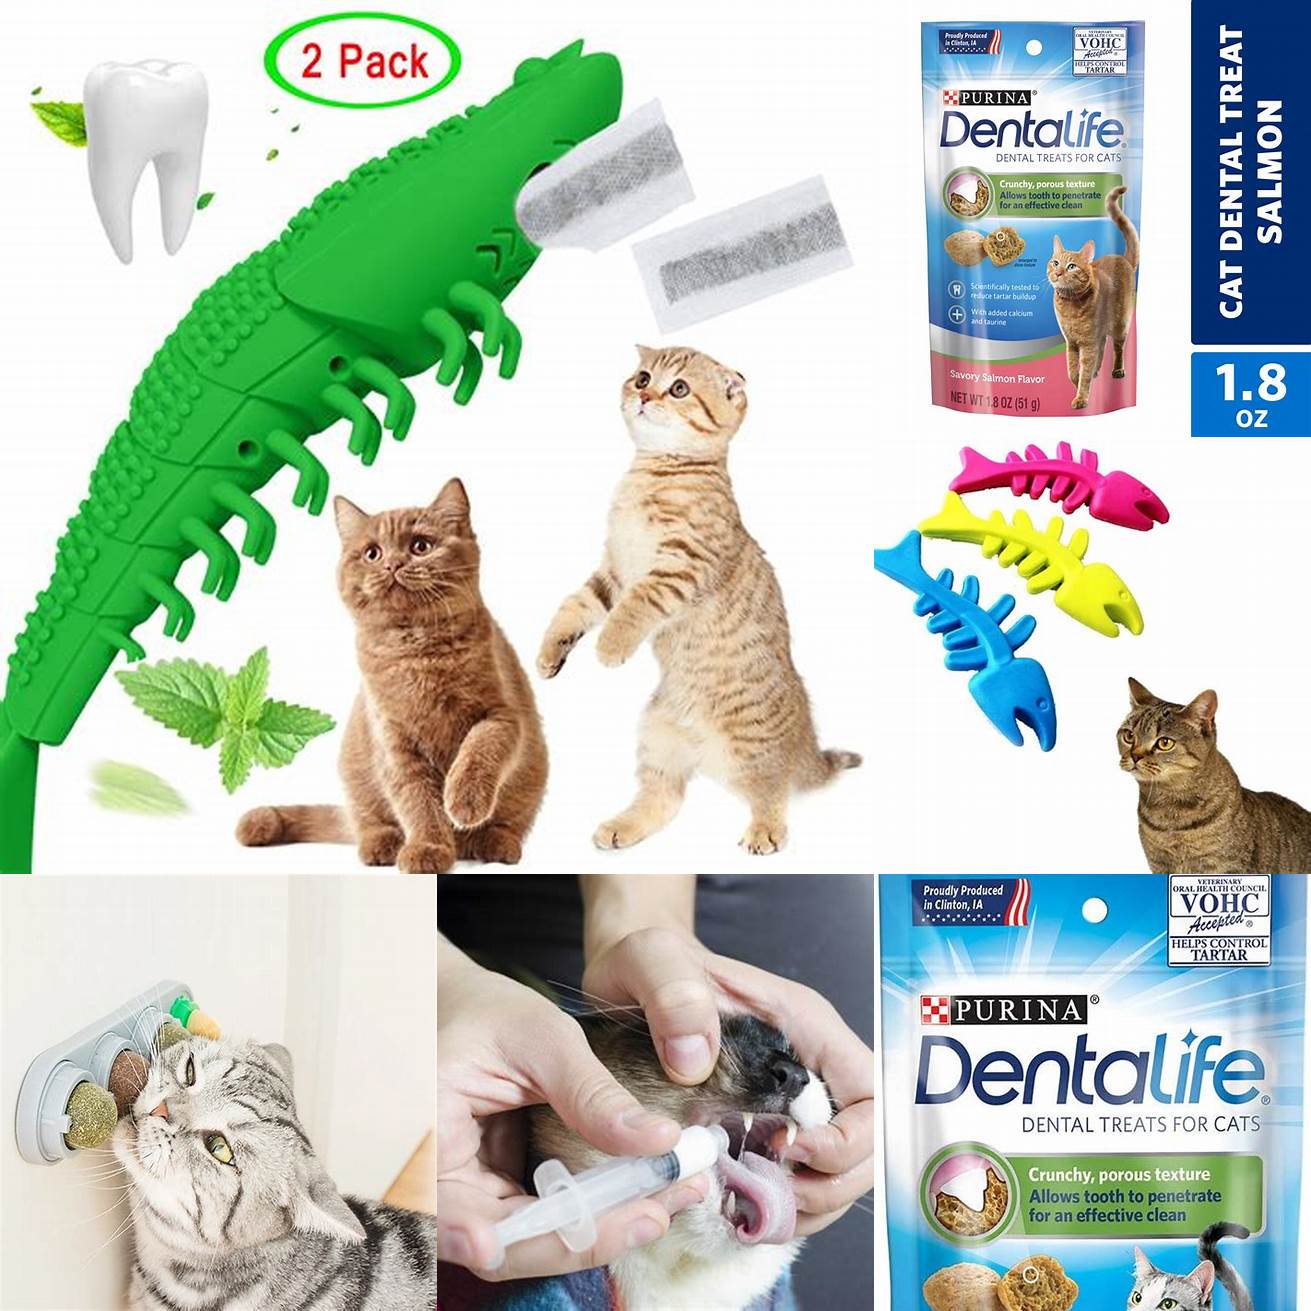 Give your cat dental treats or toys